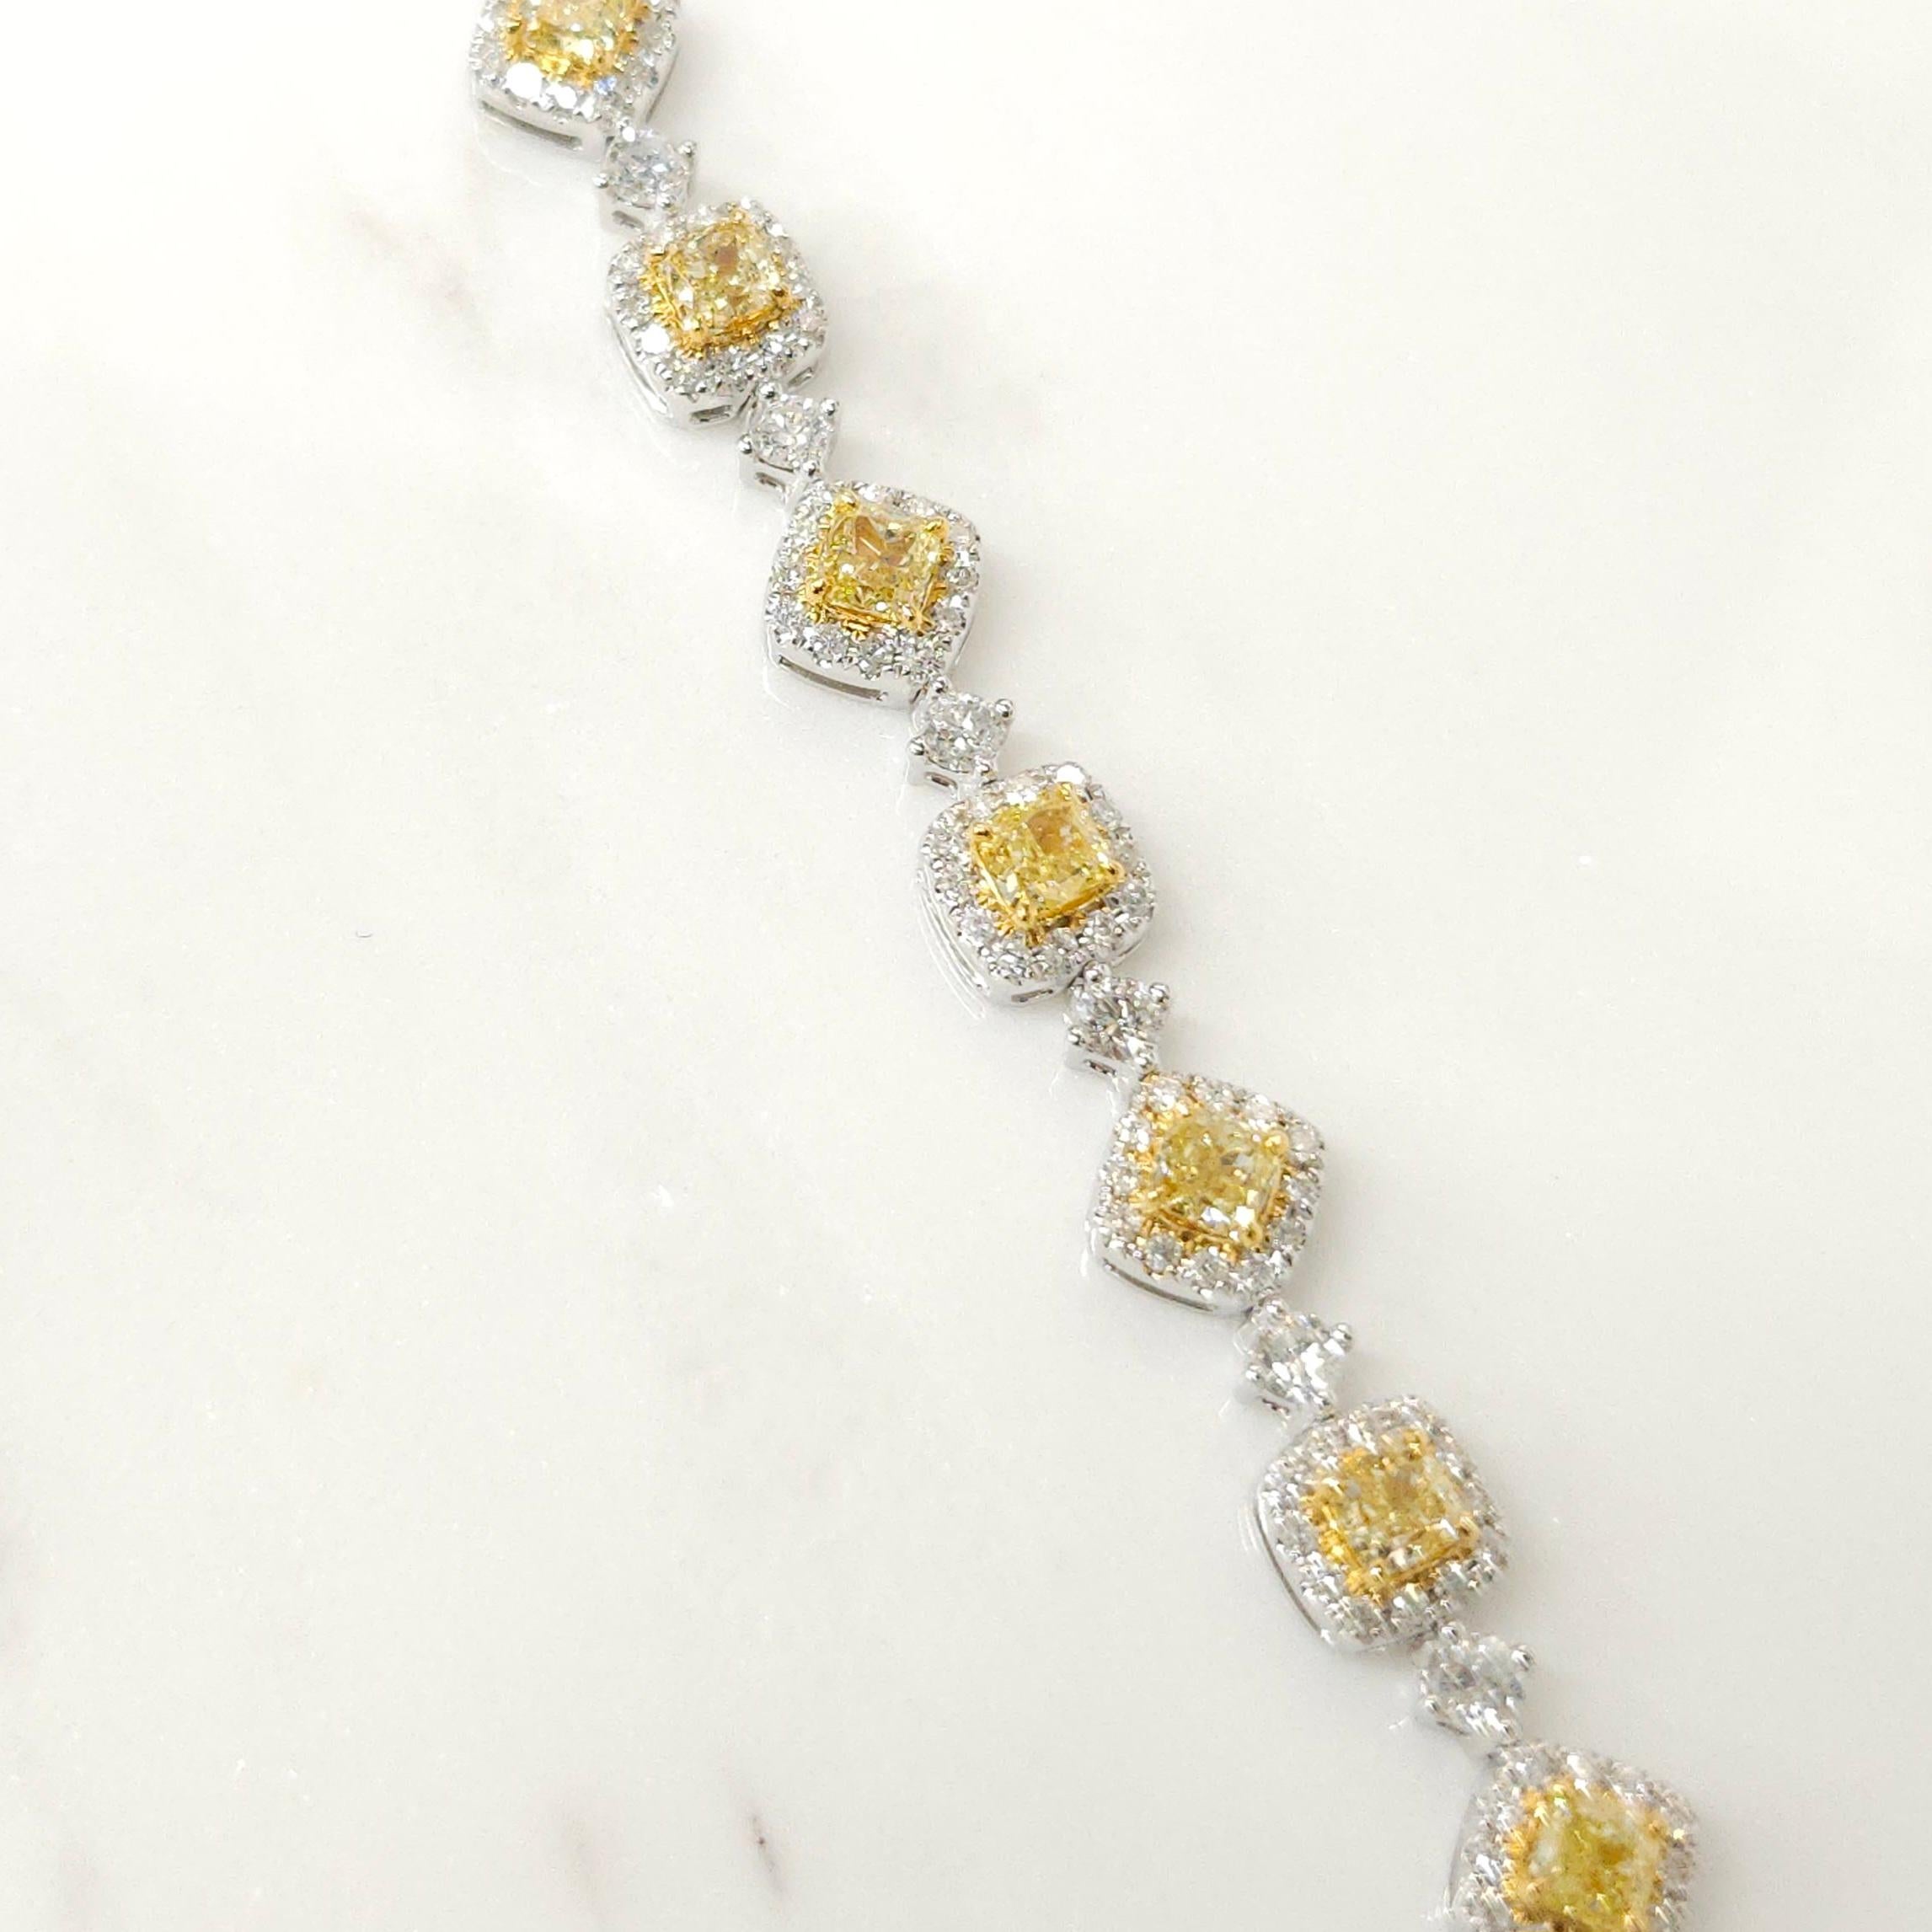 Get ready to be amazed by this stunning bracelet featuring a dazzling 3.48 carat of cushion-cut fancy yellow diamonds at the heart of it. Each yellow diamond is lovingly cradled in 18K white and yellow gold frames, with a surrounding halo of 208